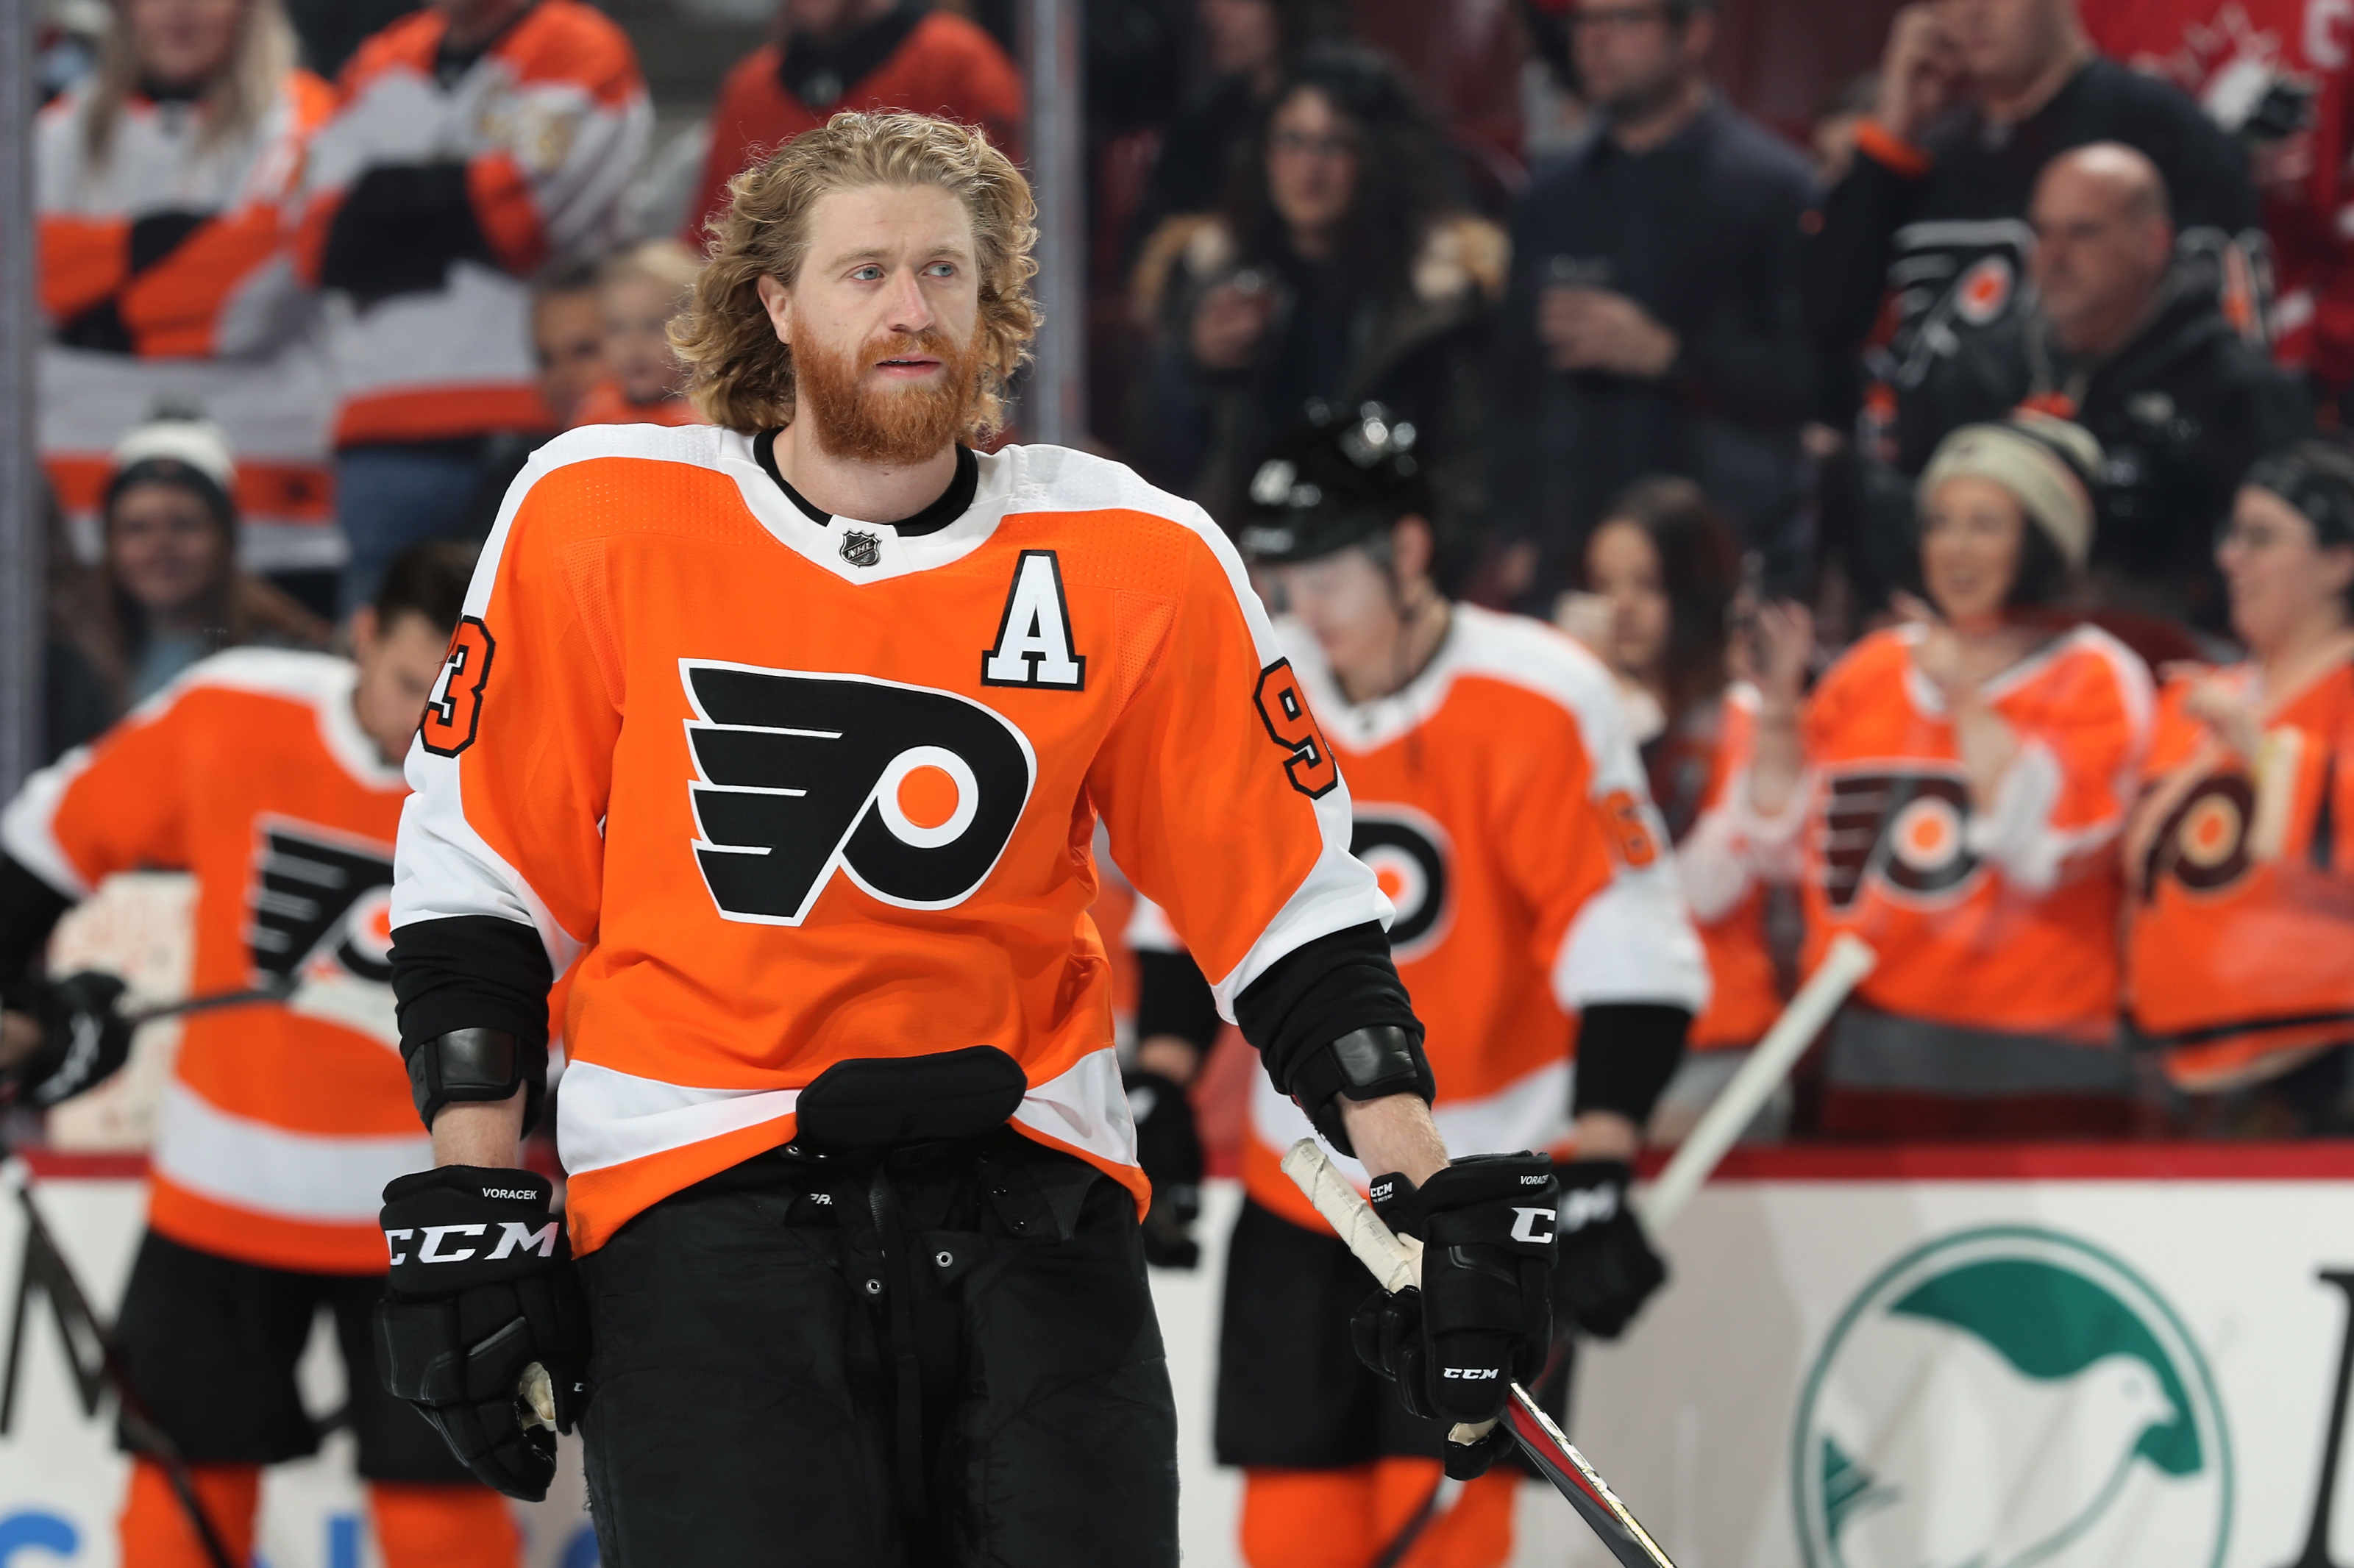 Jakub Voracek had the greatest reaction to seeing the Flyers' new